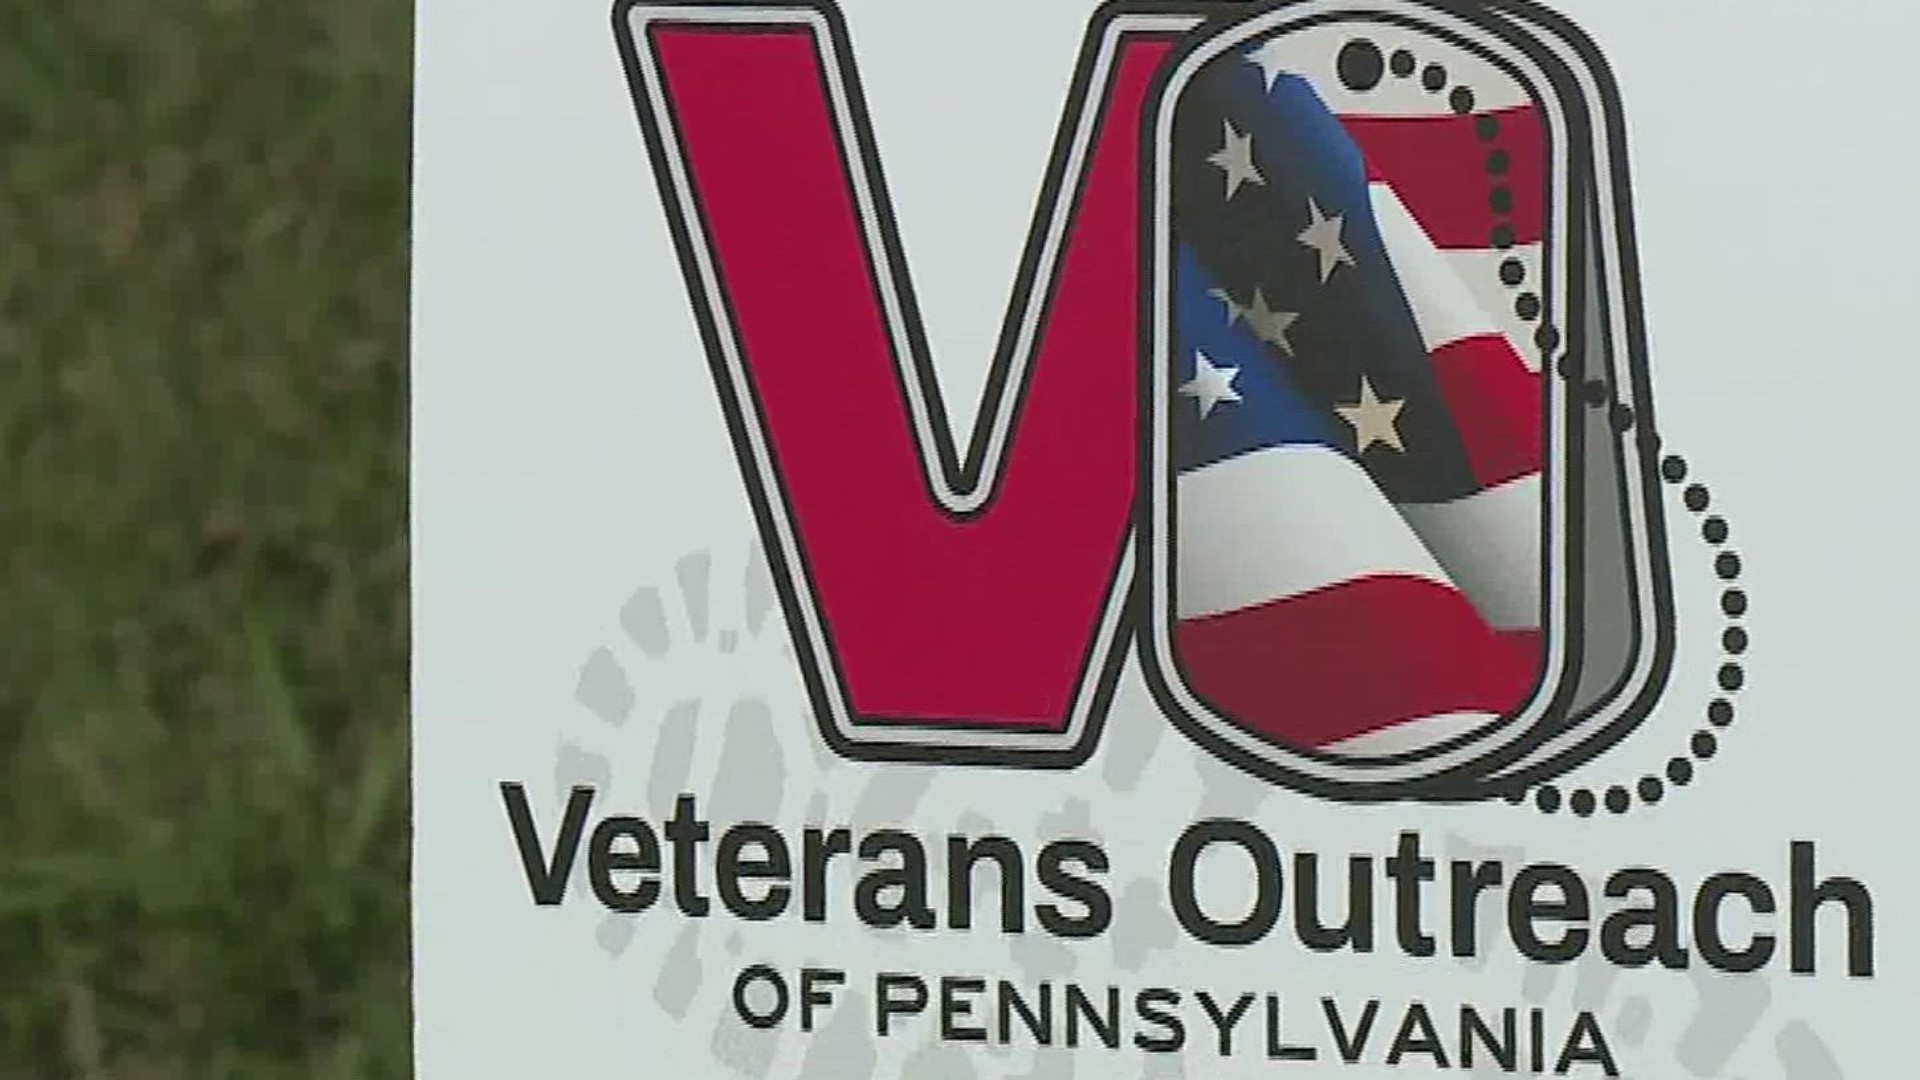 Veterans Outreach of Pennsylvania is building a 15-tiny-home village in Harrisburg based on Former U.S. Army Cpl. Chris Stout's own model.